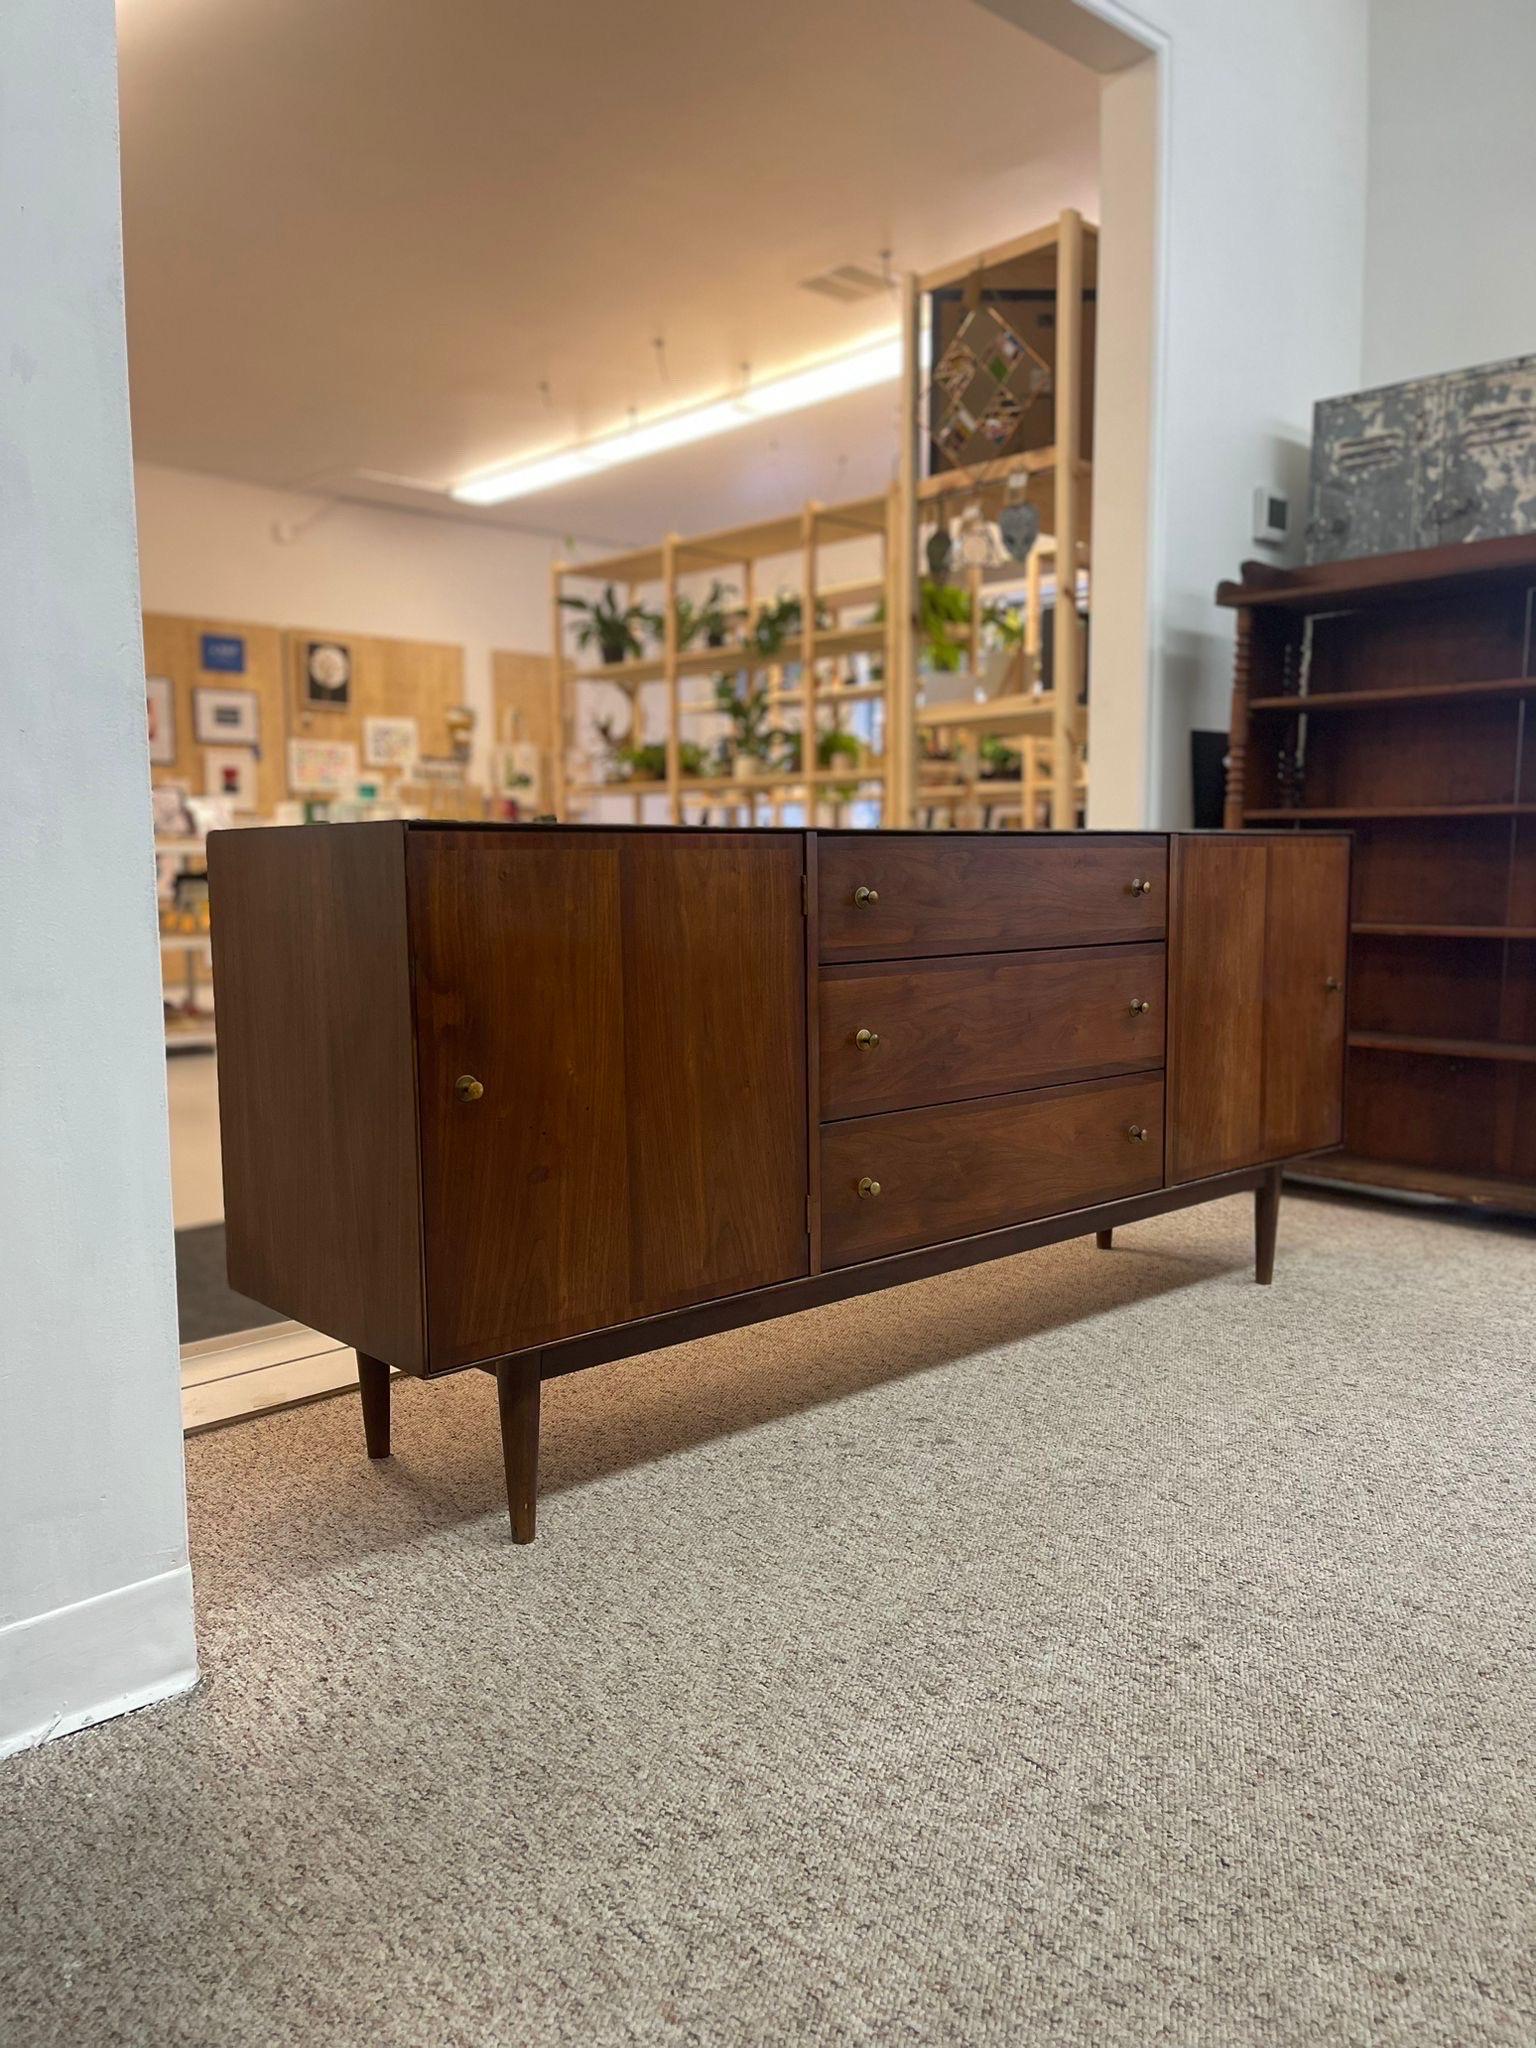 Late 20th Century Vintage Solid Wood Credenza by Stanley Furniture.